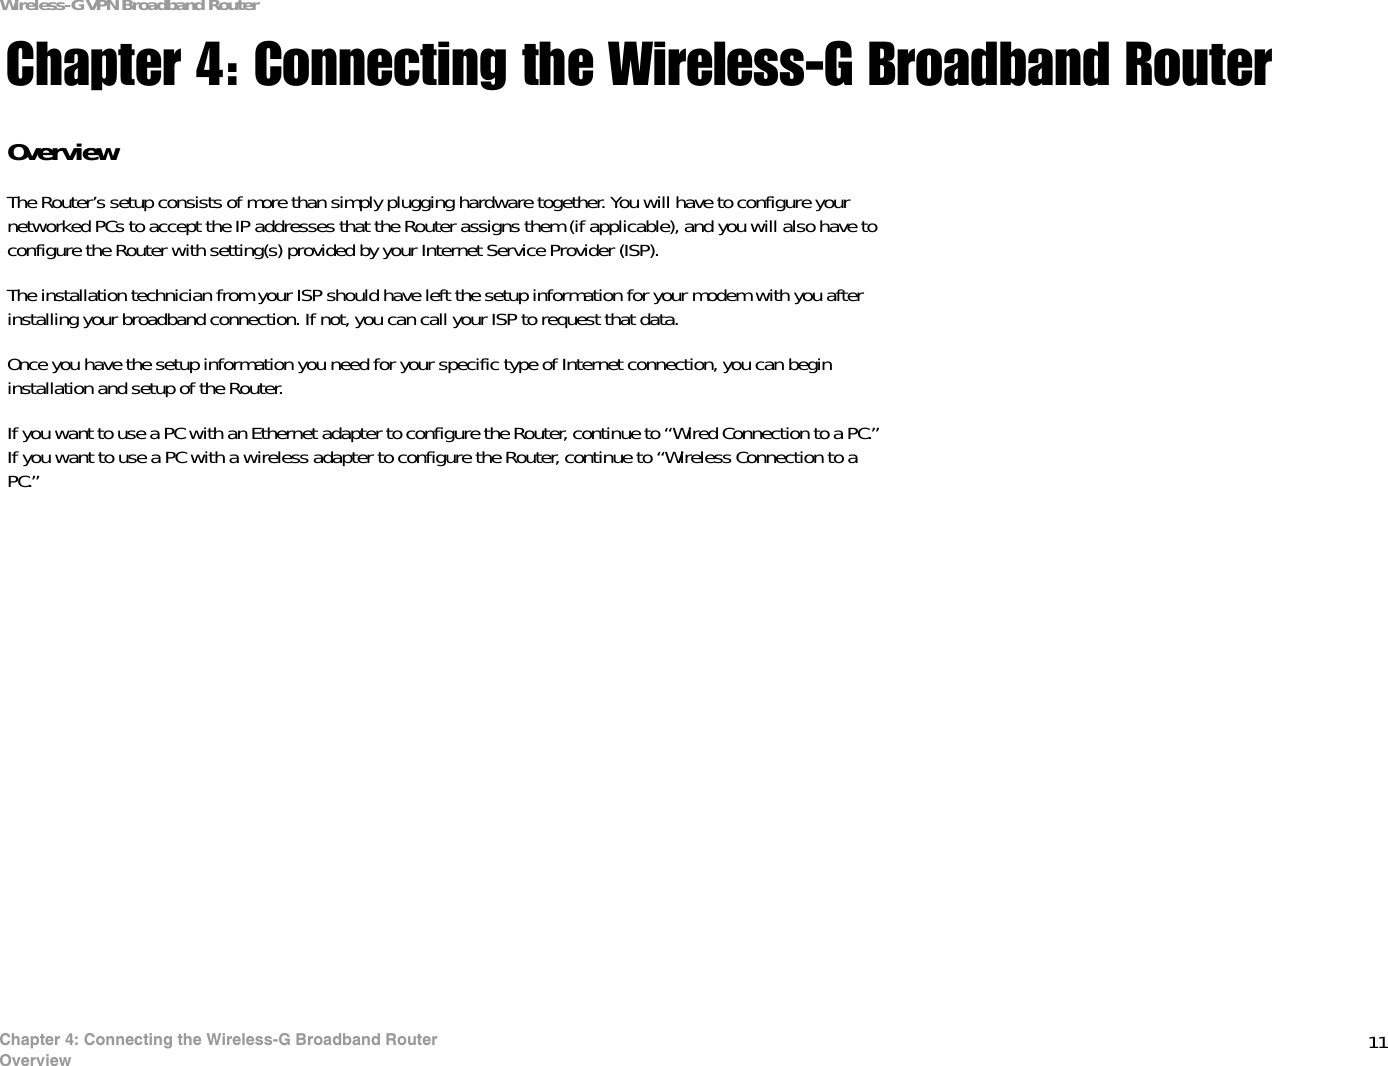 11Chapter 4: Connecting the Wireless-G Broadband RouterOverviewWireless-G VPN Broadband RouterChapter 4: Connecting the Wireless-G Broadband RouterOverviewThe Router’s setup consists of more than simply plugging hardware together. You will have to configure your networked PCs to accept the IP addresses that the Router assigns them (if applicable), and you will also have to configure the Router with setting(s) provided by your Internet Service Provider (ISP).The installation technician from your ISP should have left the setup information for your modem with you after installing your broadband connection. If not, you can call your ISP to request that data. Once you have the setup information you need for your specific type of Internet connection, you can begin installation and setup of the Router.If you want to use a PC with an Ethernet adapter to configure the Router, continue to “Wired Connection to a PC.” If you want to use a PC with a wireless adapter to configure the Router, continue to “Wireless Connection to a PC.”